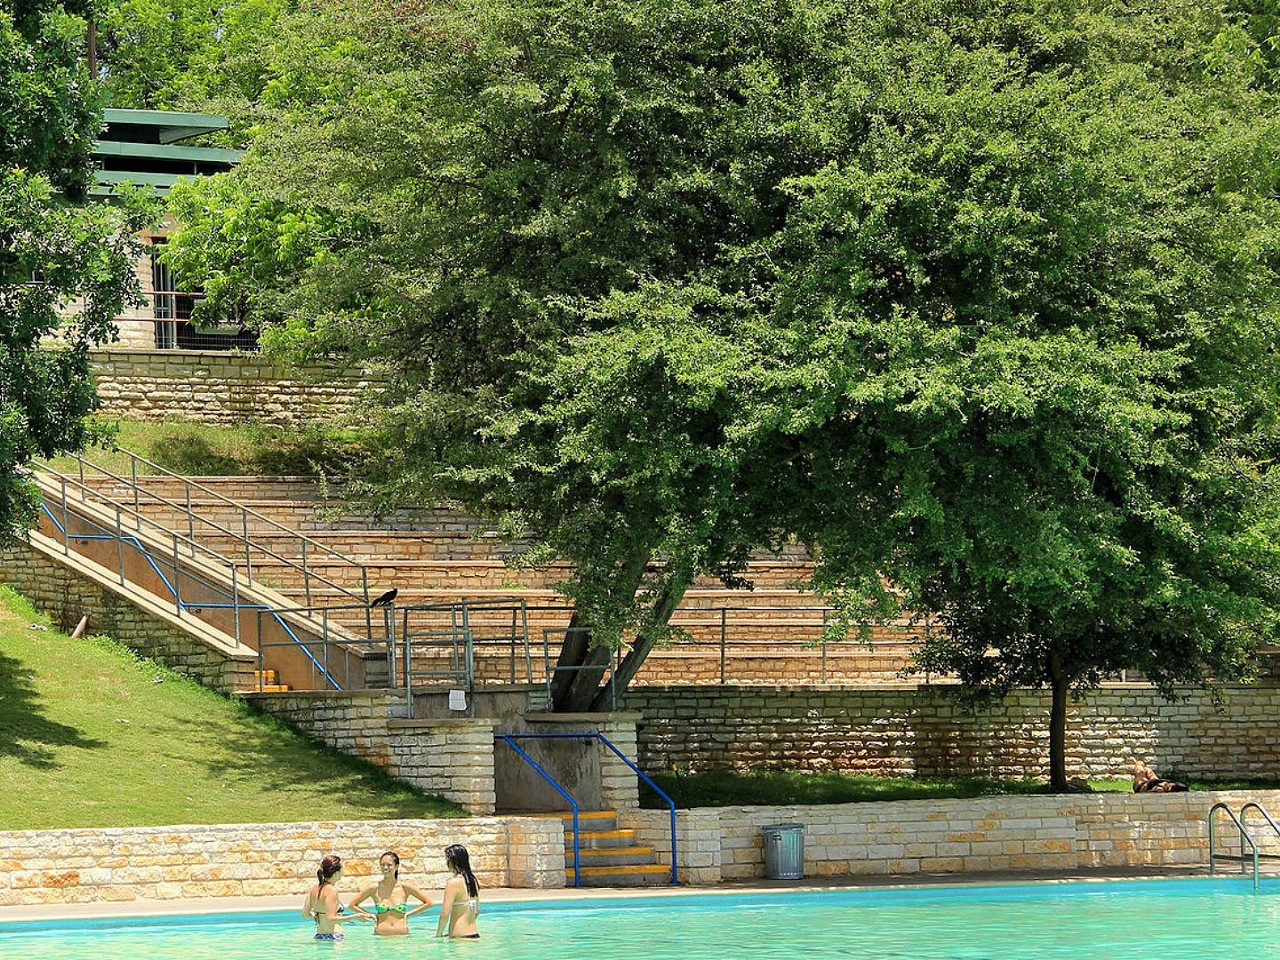 Deep Eddy
401 Deep Eddy Ave., Austin, (512) 472-8546, austintexas.gov
Austin's Deep Eddy is the oldest swimming pool in Texas. Capacity is limited, so get there early to beat the crowds.